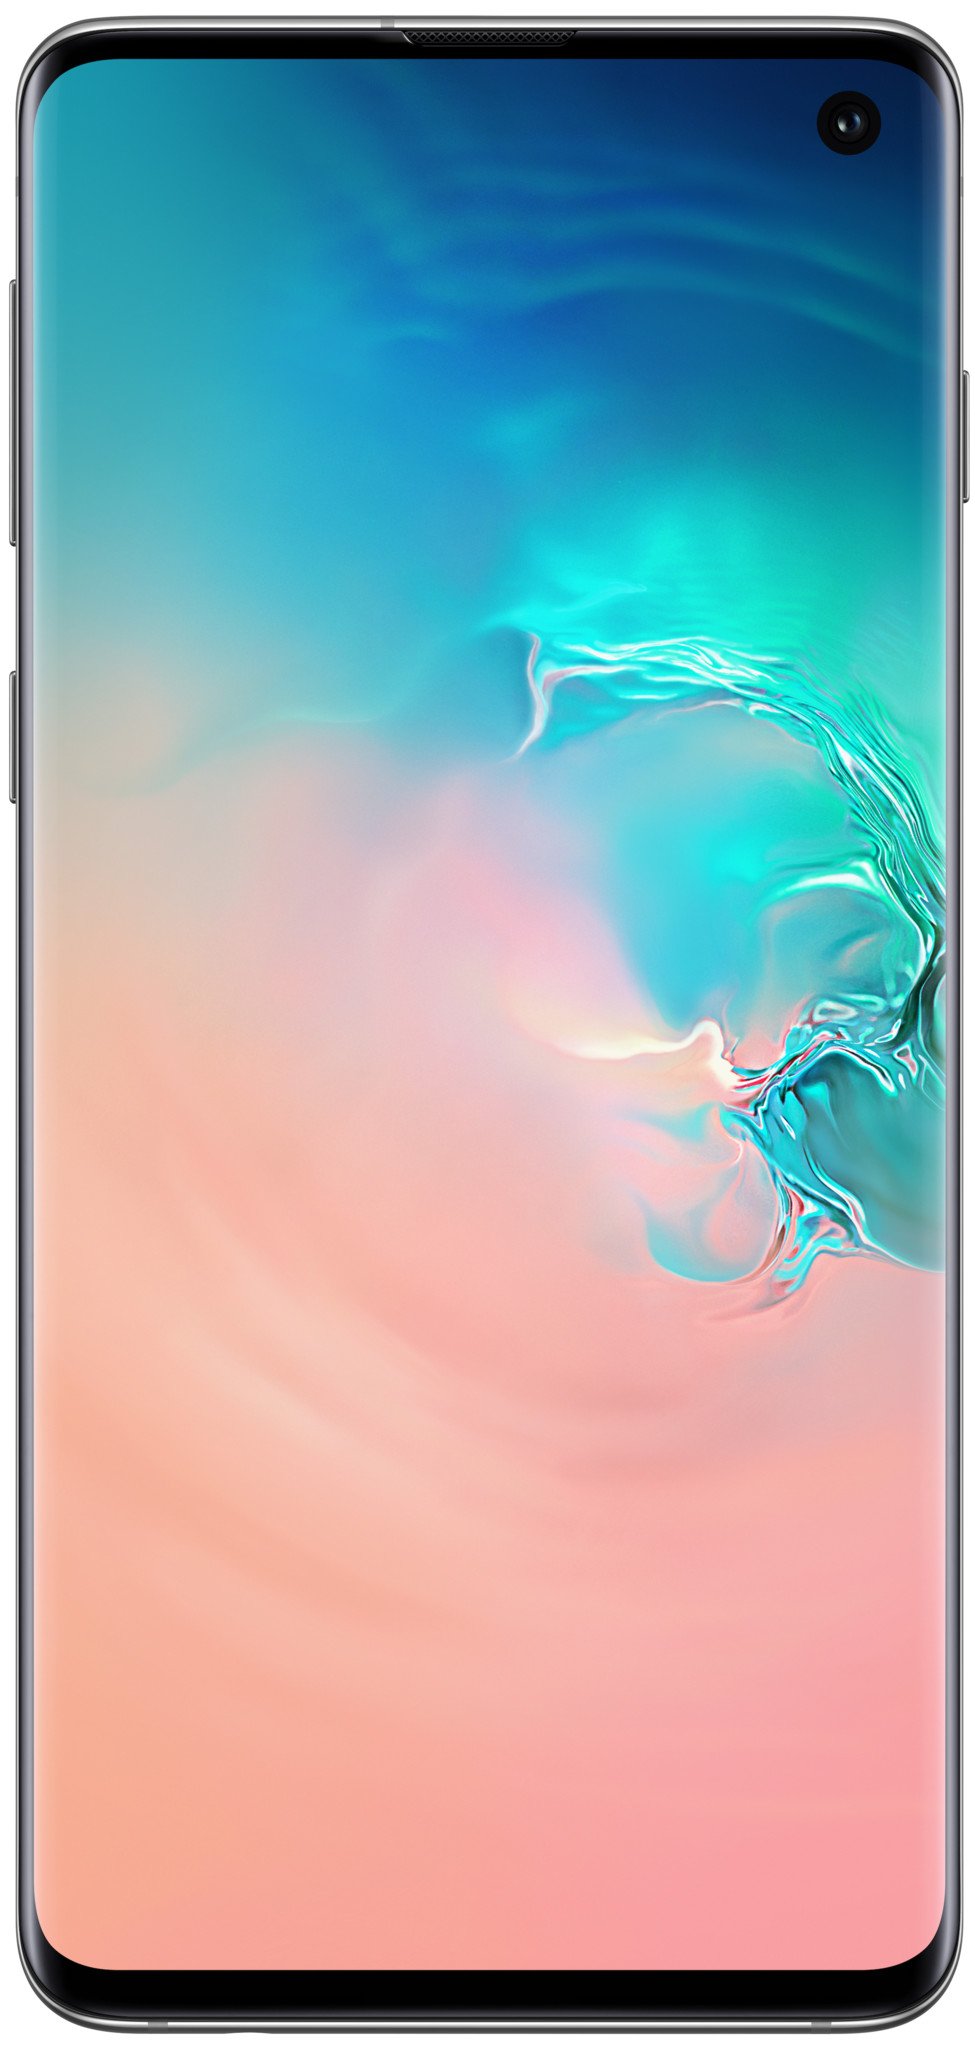 https://www.androidcentral.com/sites/androidcentral.com/files/article_images/2019/02/galaxy-s10-render-front-white.jpg?itok=yoo8LxAG